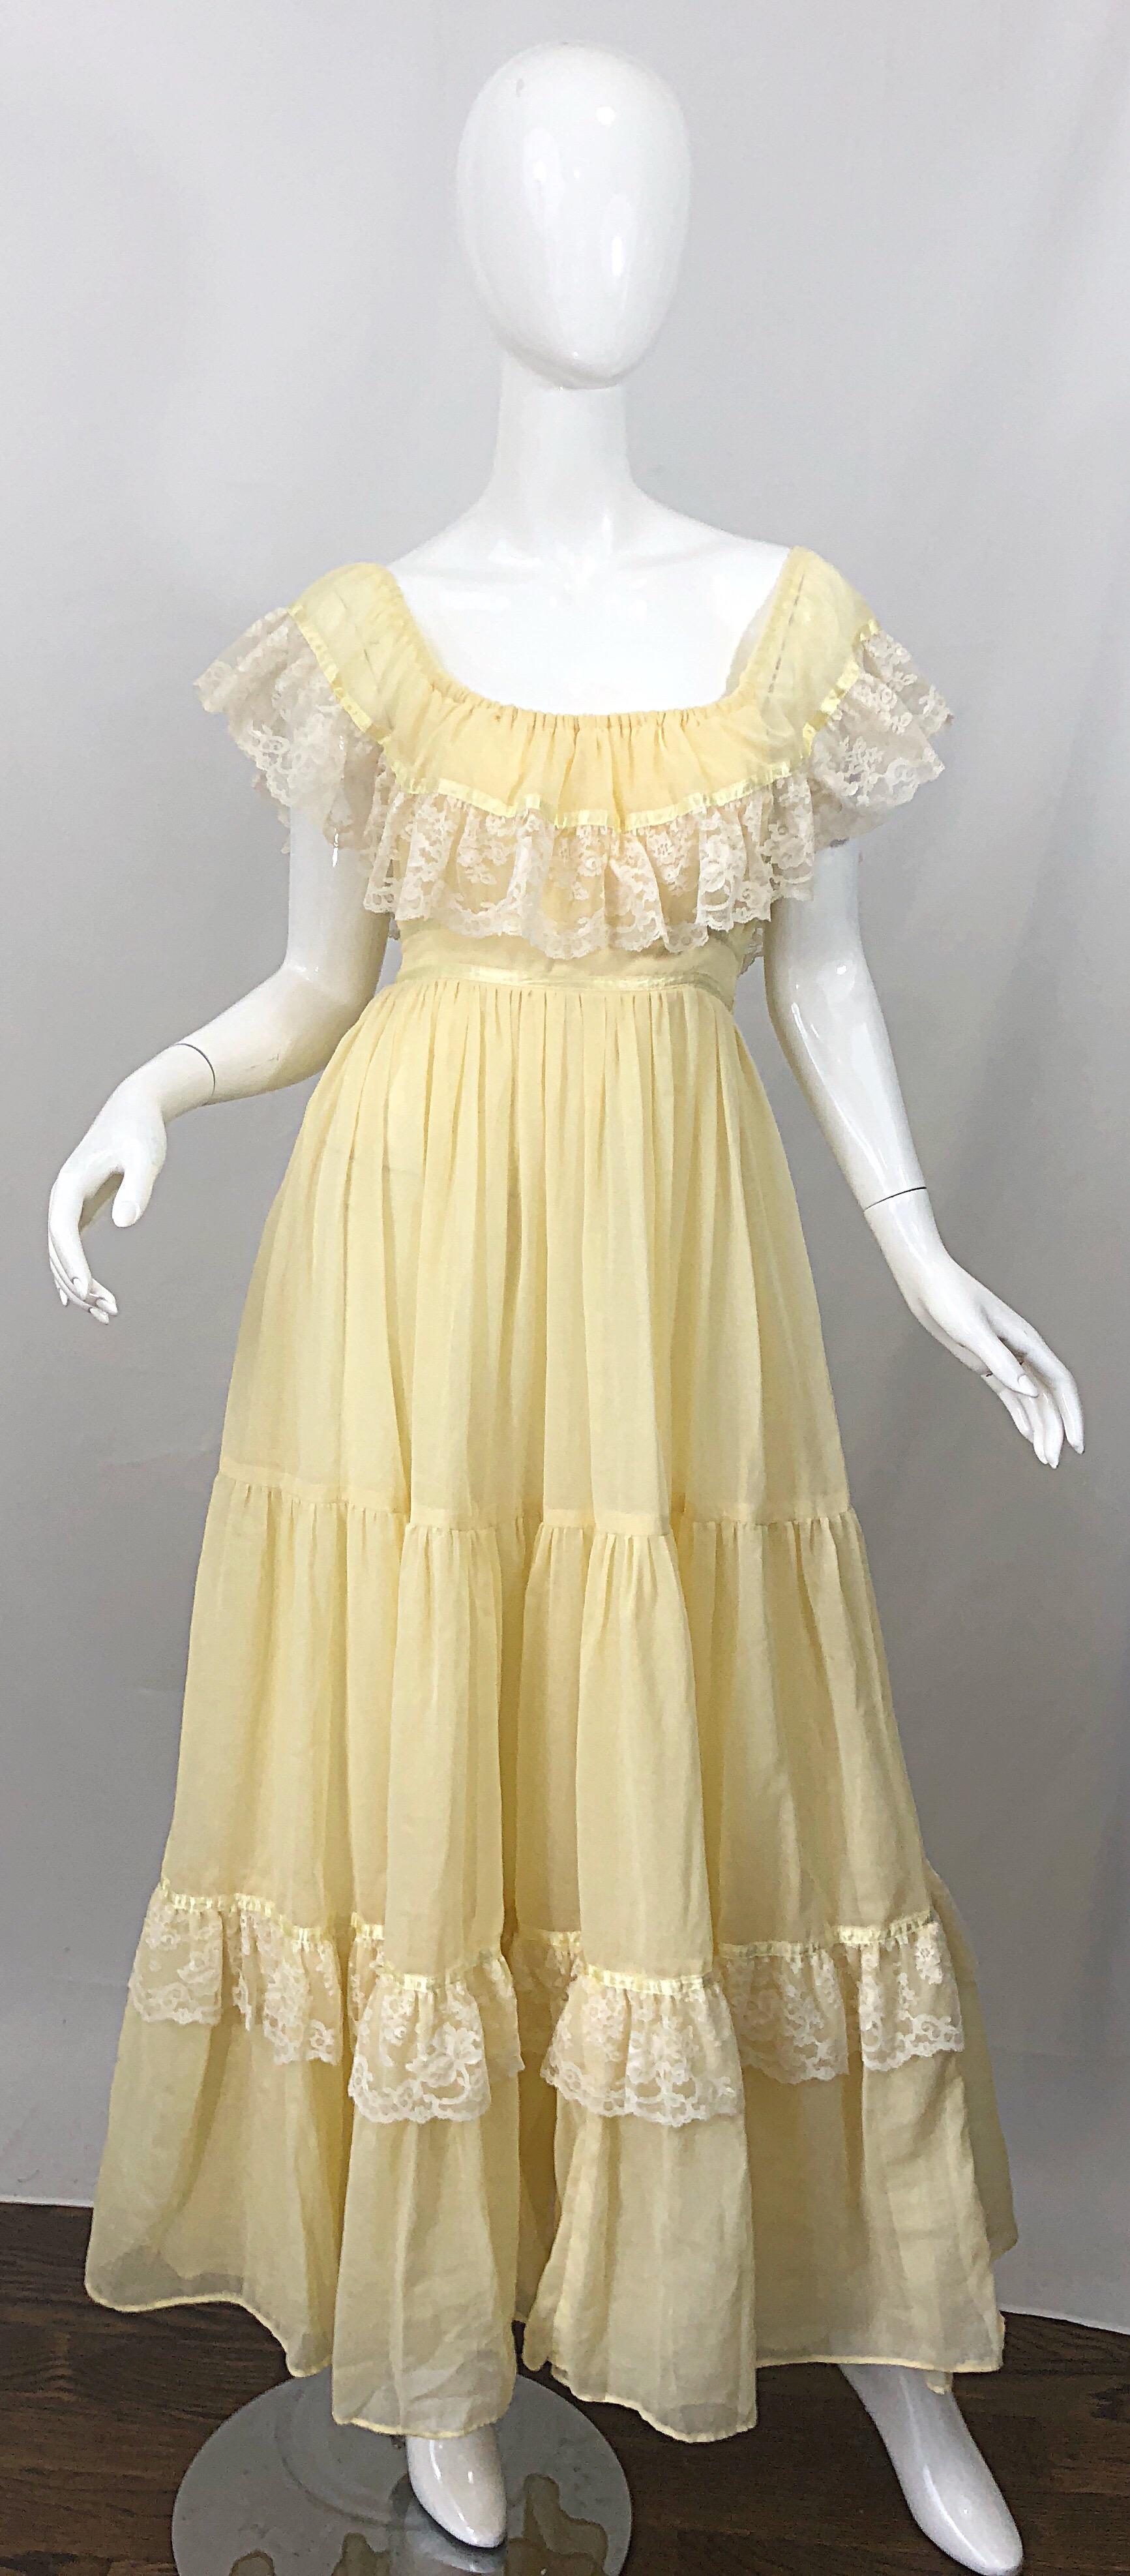 Amazing 1970s pale yellow and white cotton voile and lace boho empire maxi dress! Features white lace around the bodice and at the ruffle hem. Can be worn on or off the shoulders. Flattering empire waist is easy to wear. Ties at back waist can